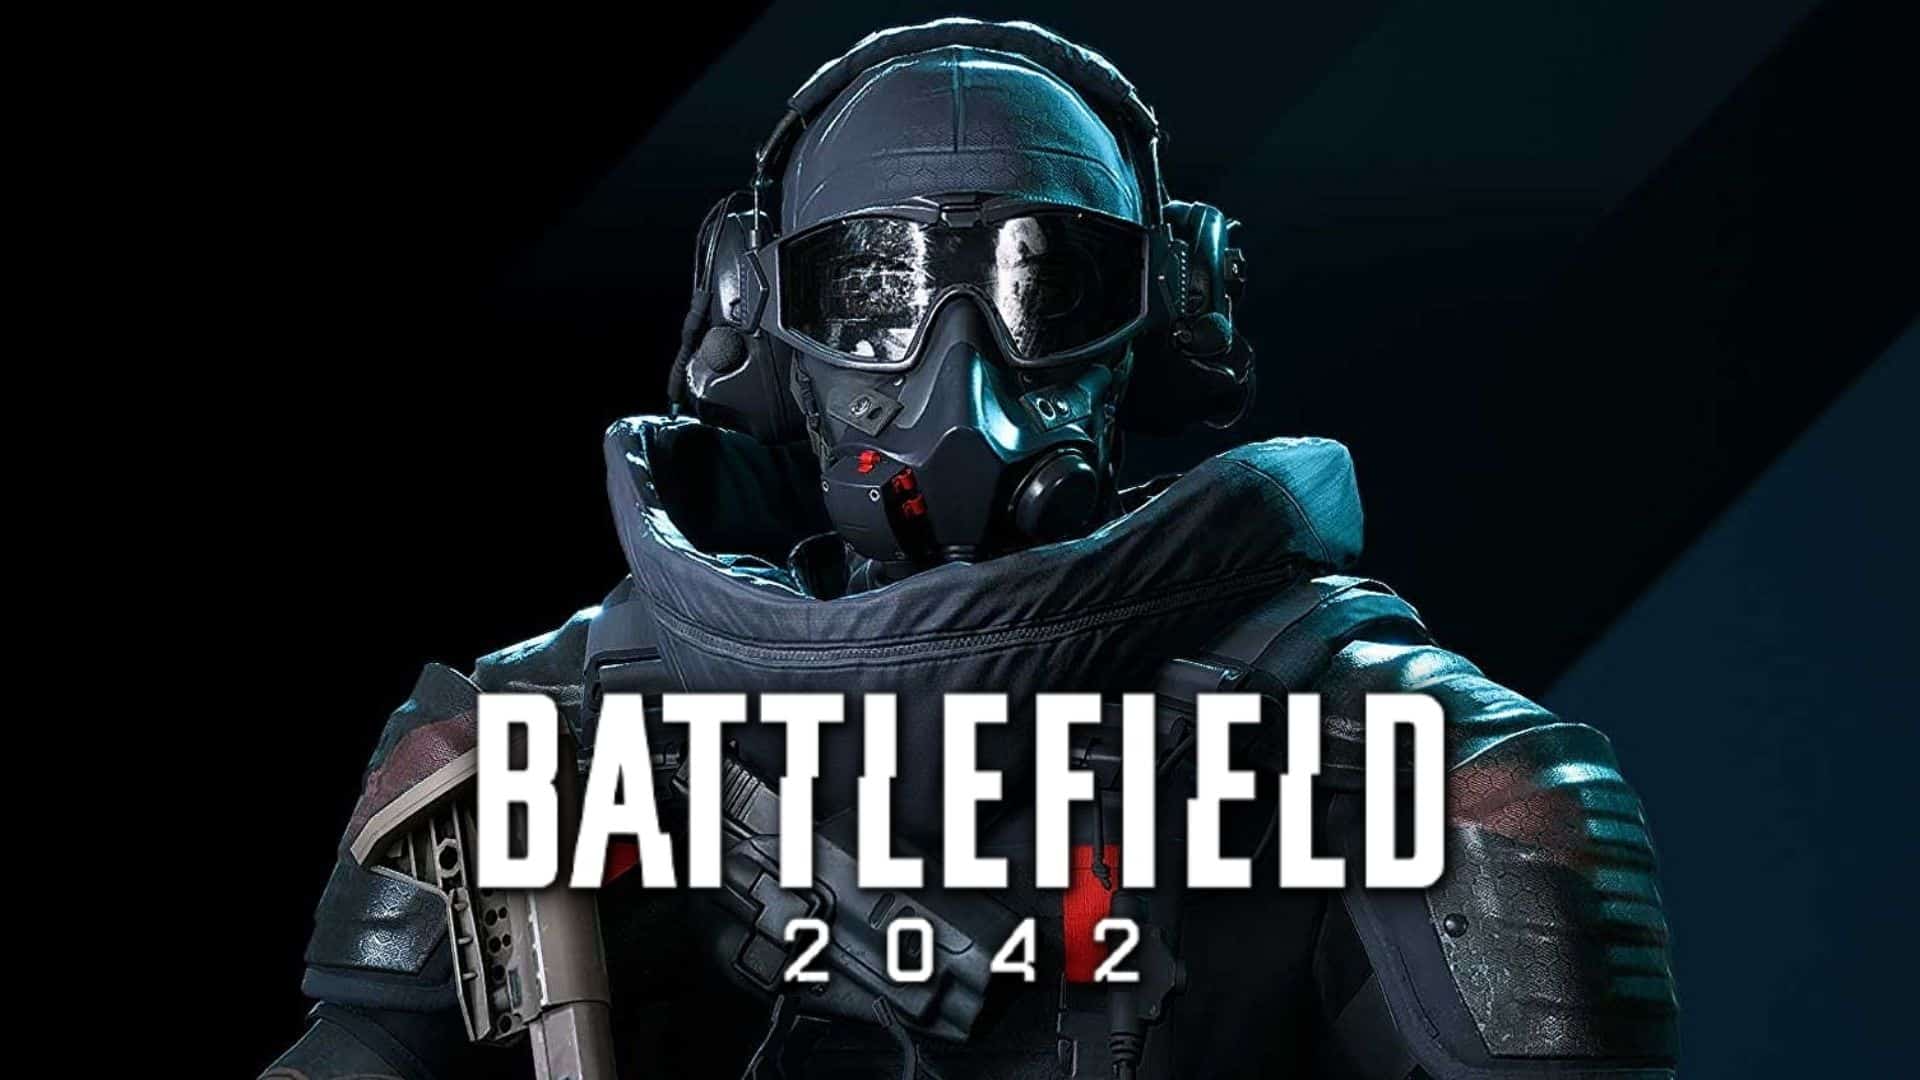 Battlefield 2042 Update 1.000.045 Released for Patch 5.3.0 This August 29